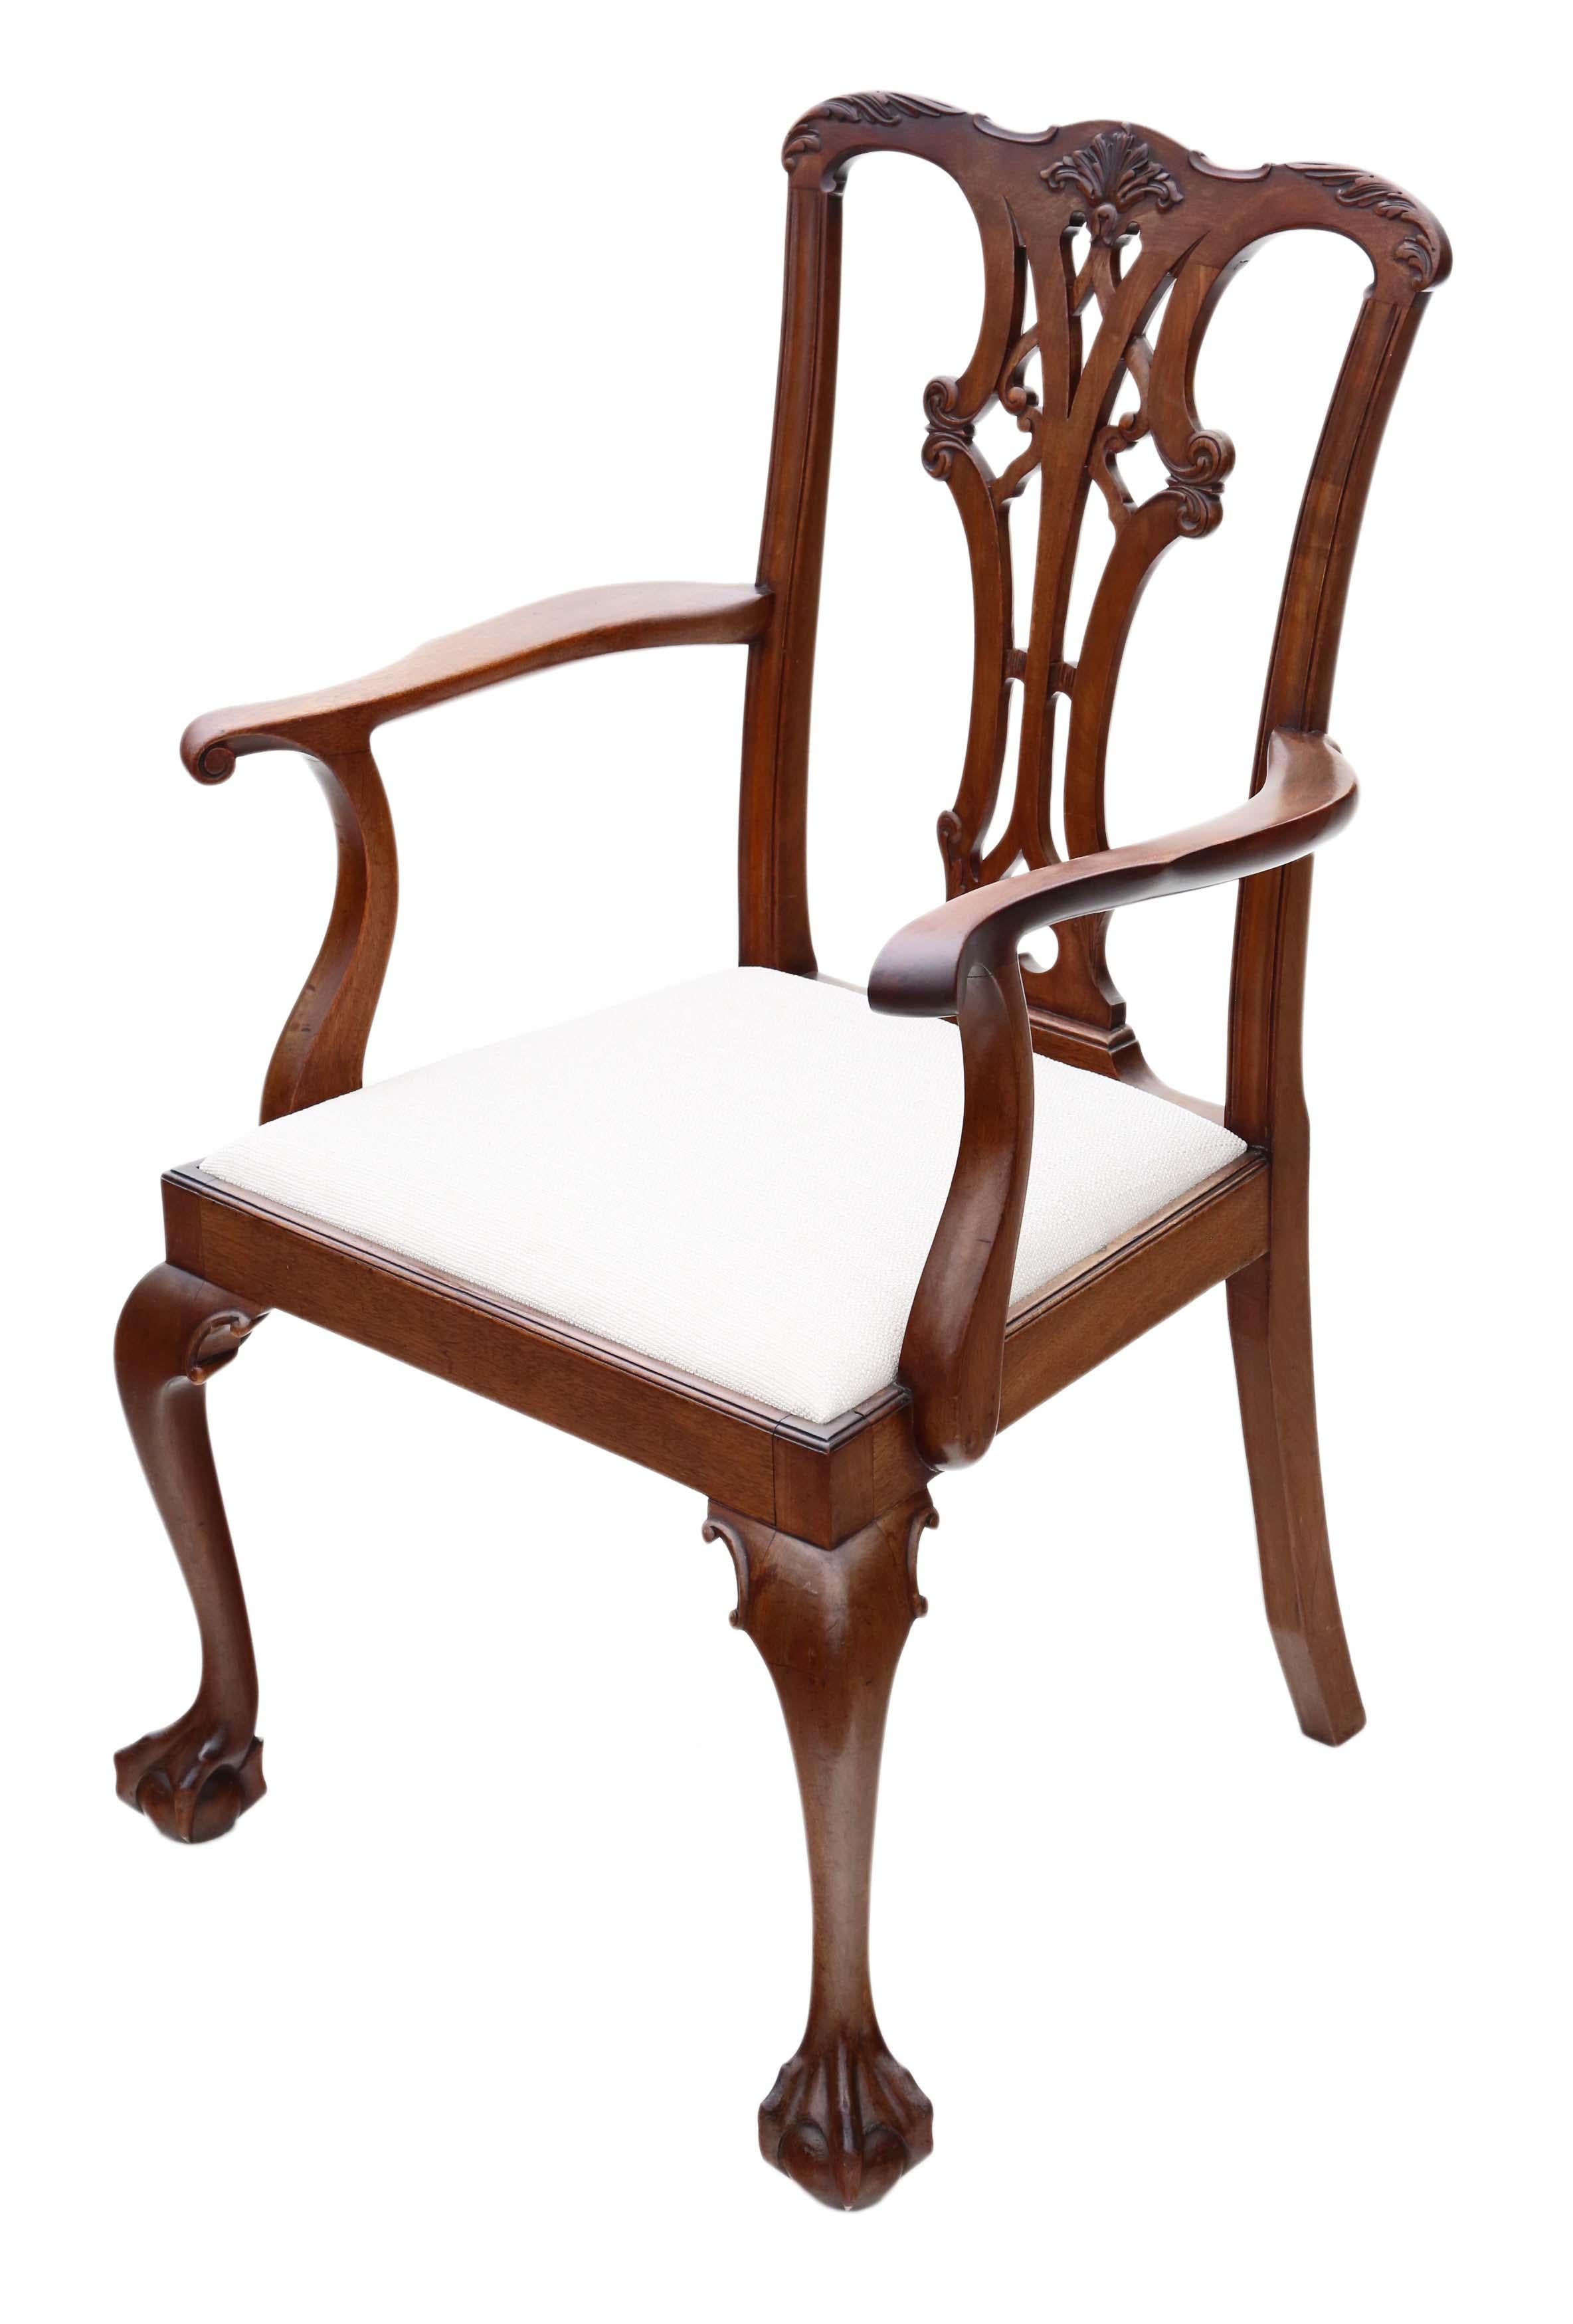 Georgian Revival Mahogany Dining Chairs: Set of 8 (6+2), Antique Quality, C1910 For Sale 4